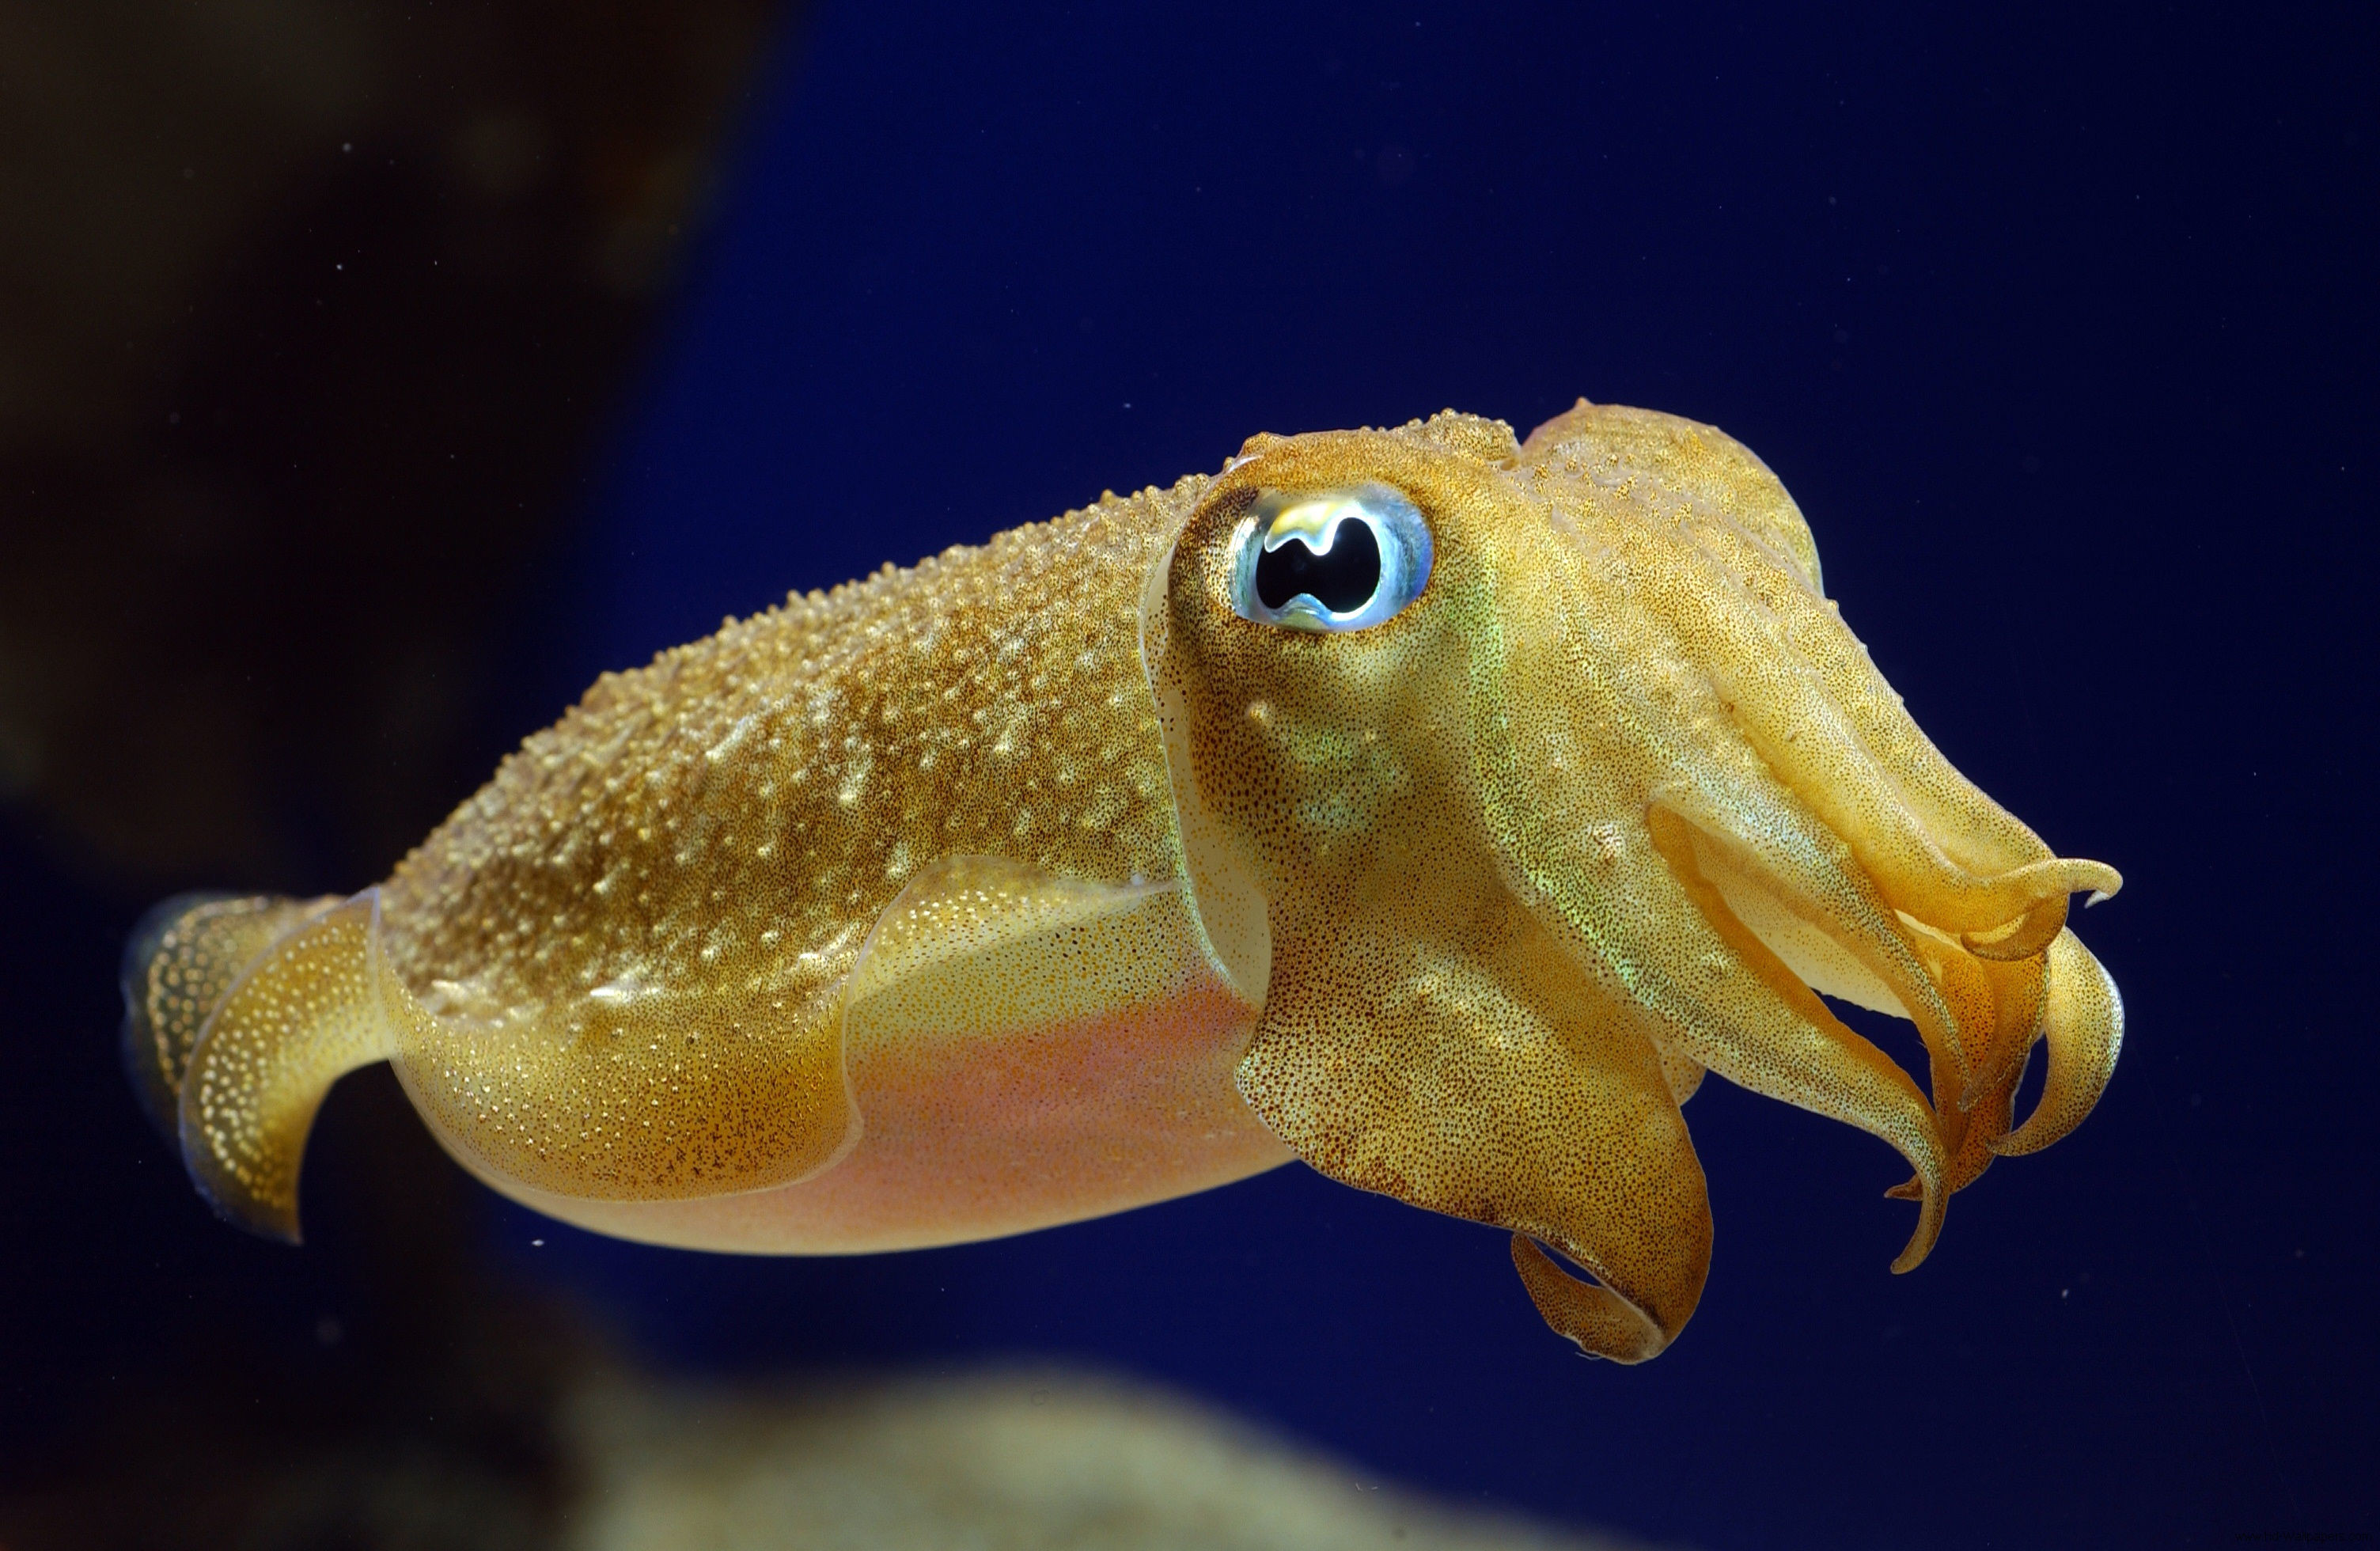 3008x1960 wallpaper.wiki-Cute-Octopus-Images-PIC-WPD001498